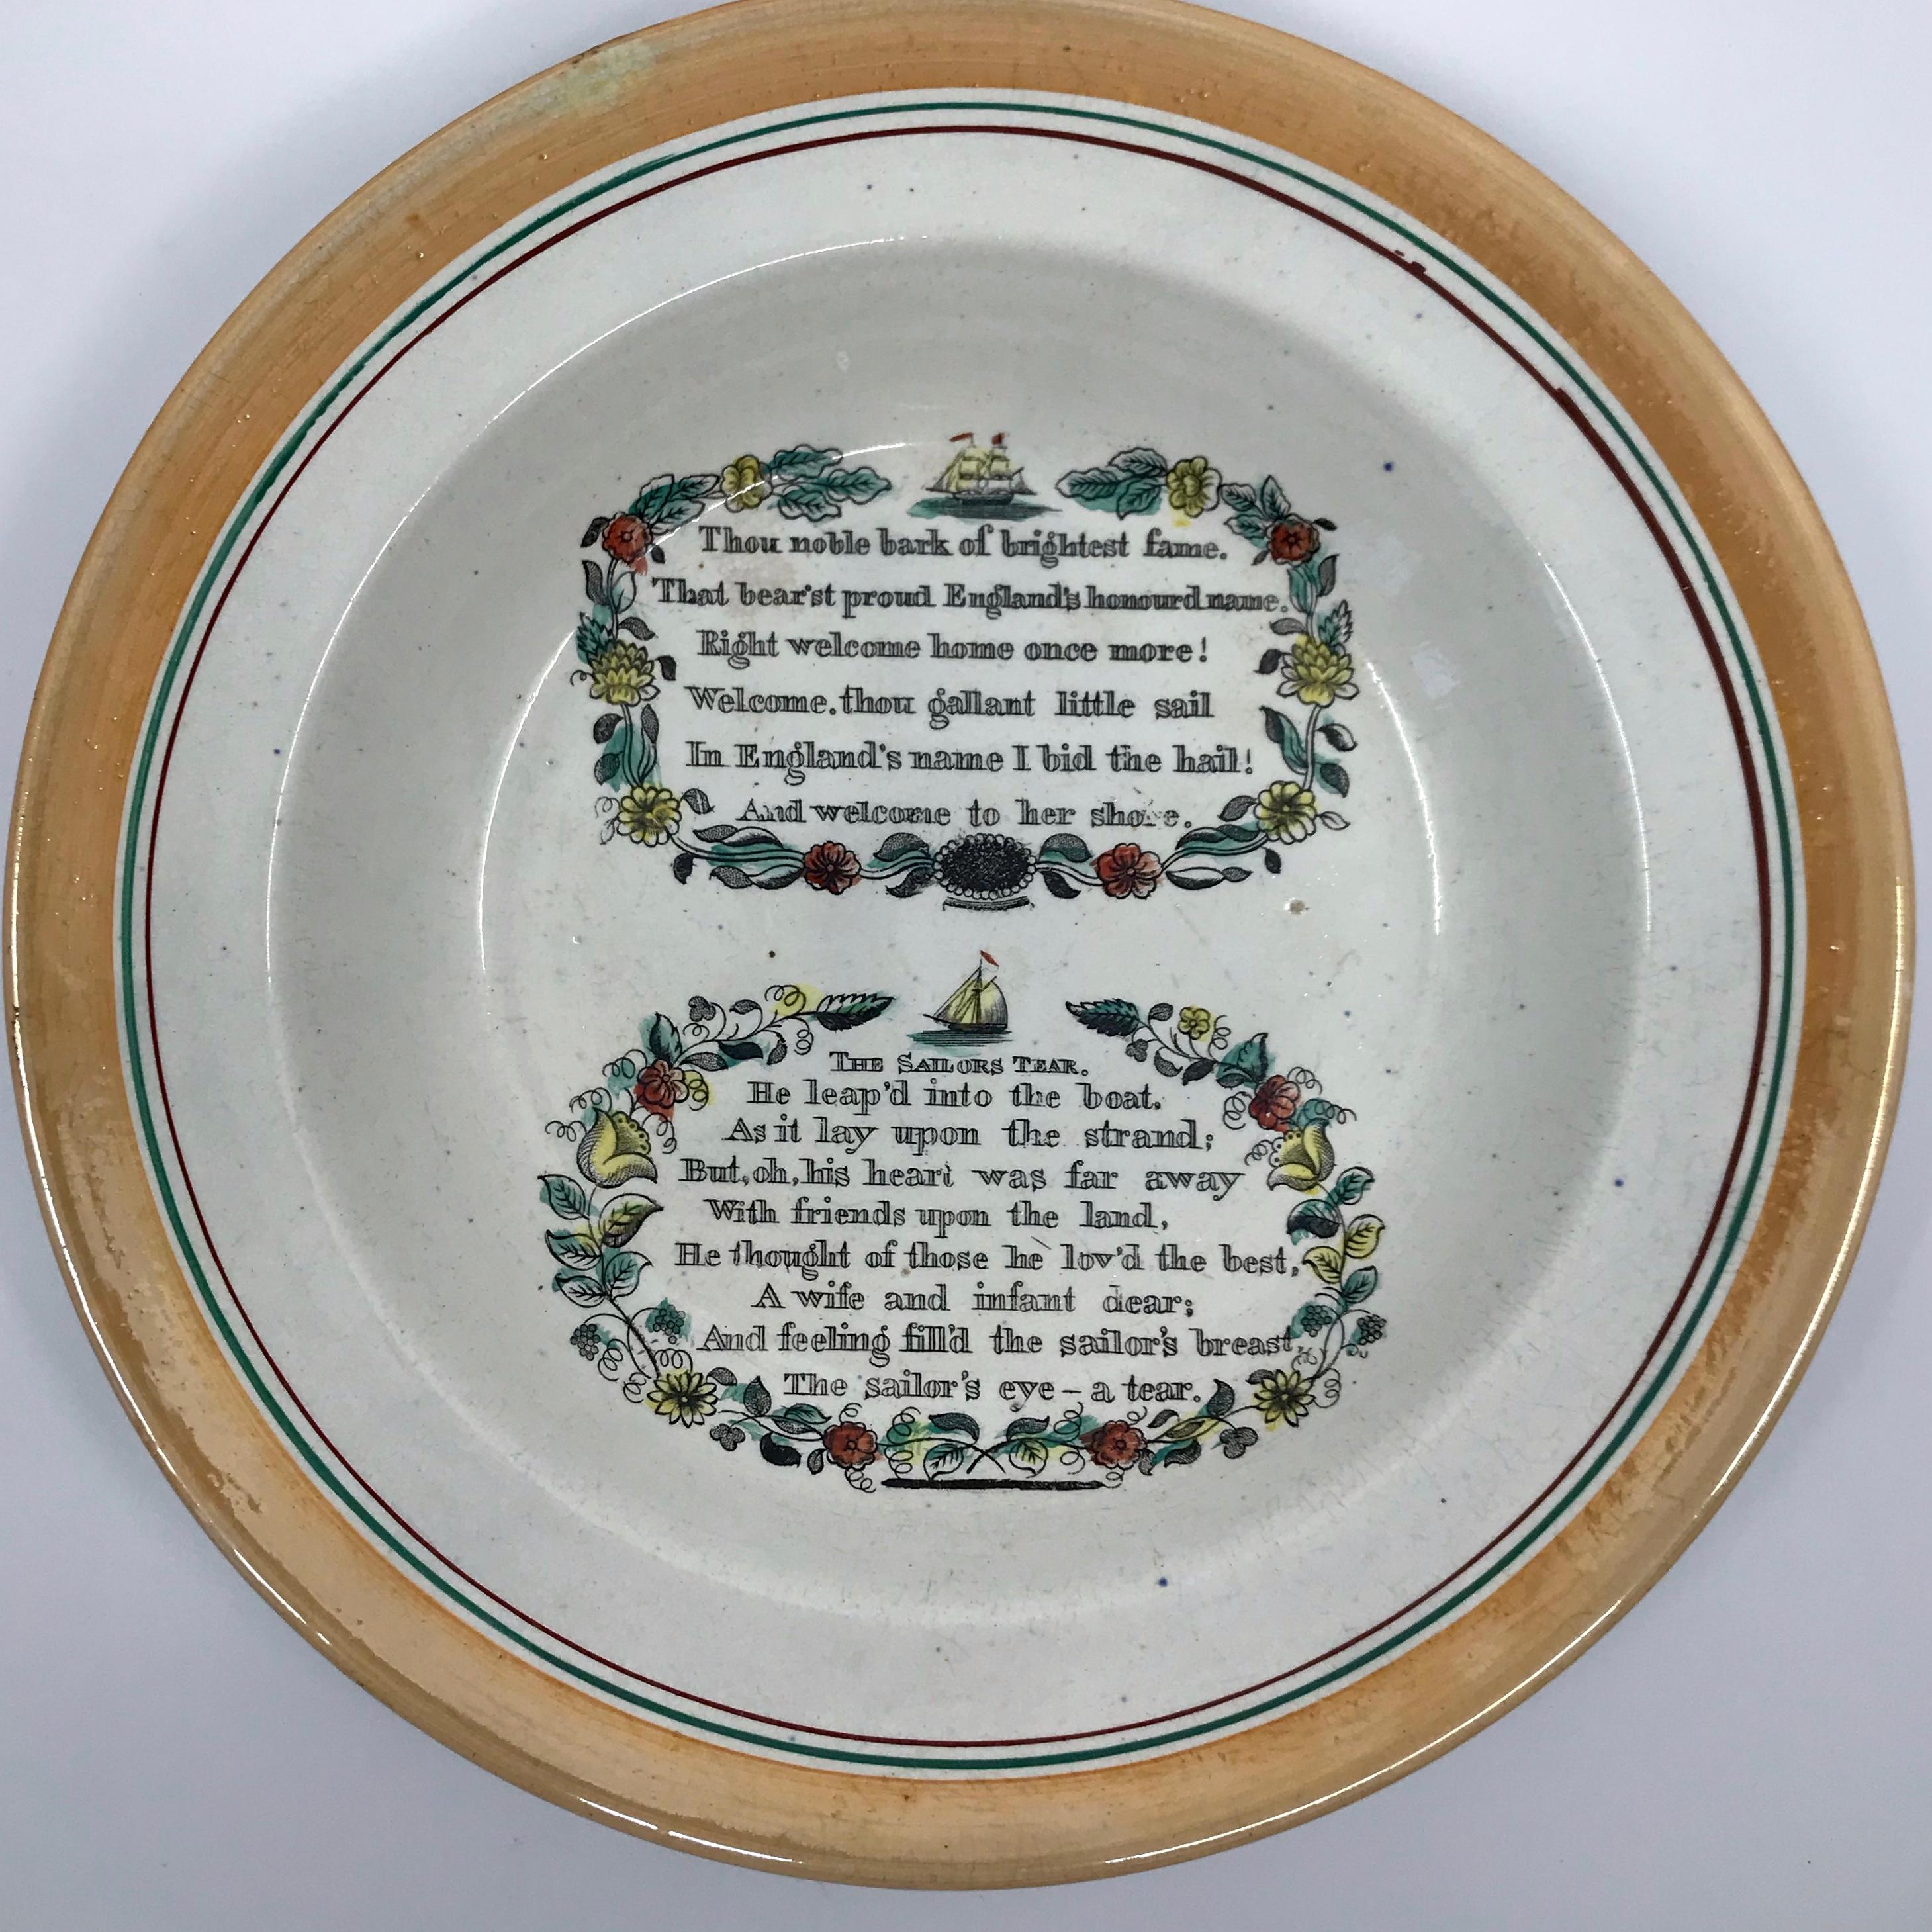 English creamware sailor plates. Pair painted rare creamware plates or shallow soups with apricot, green and red banding and English verses on sailors and ships set within floral wreaths with sailing vessels, England, early 19th century.